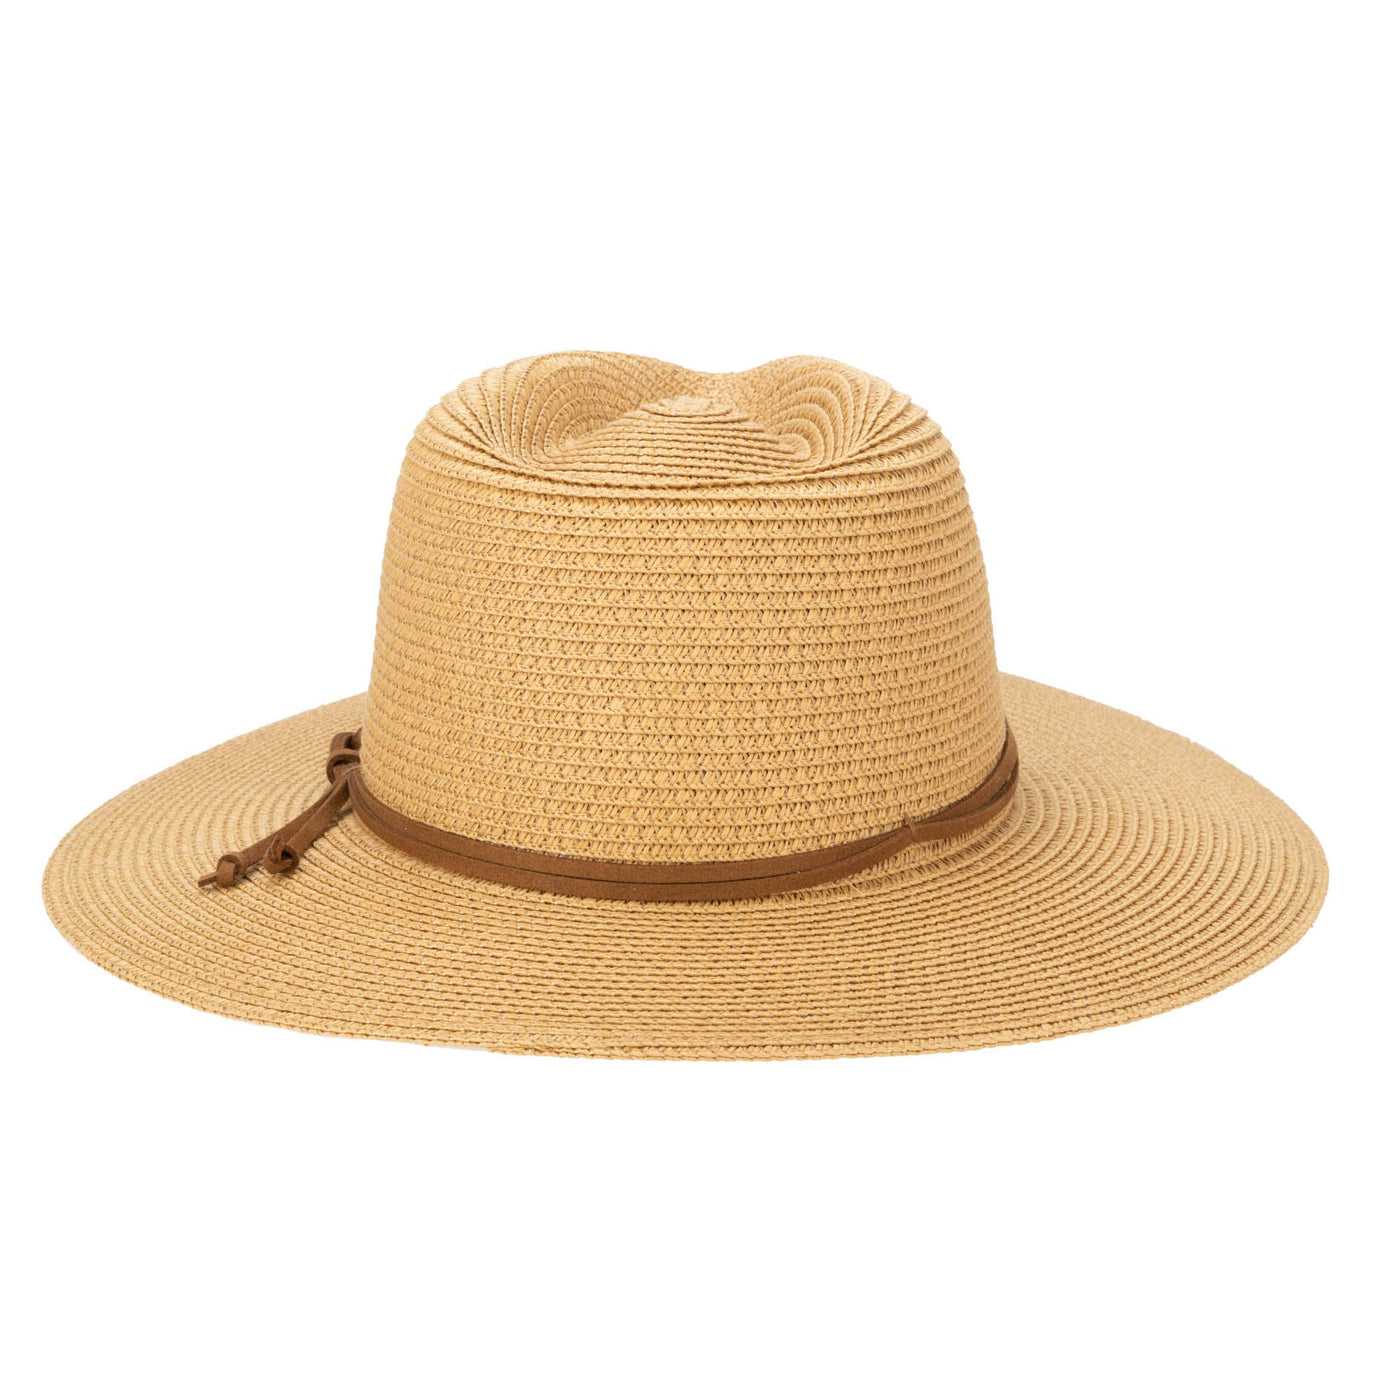 FEDORA - Men's Paperbraid Fedora With Faux Suede Looped Braid